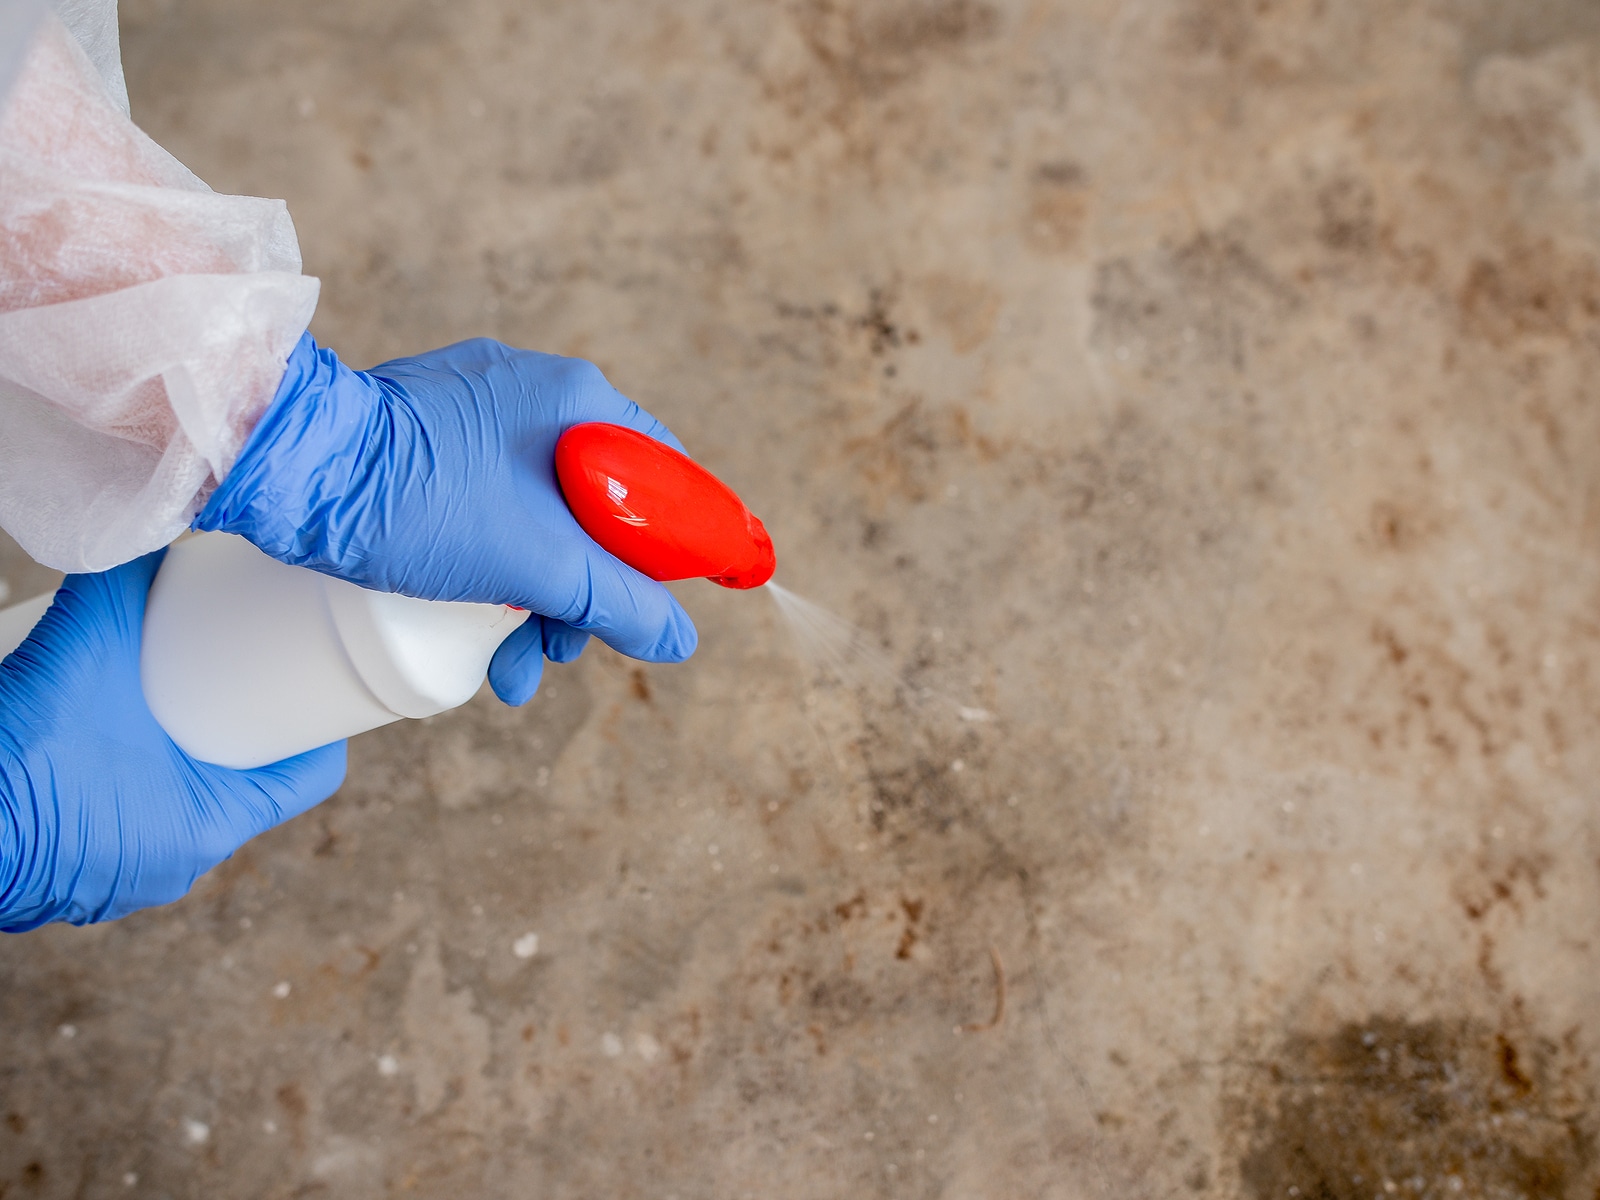 Answers to All Your Questions About Mold Inspections